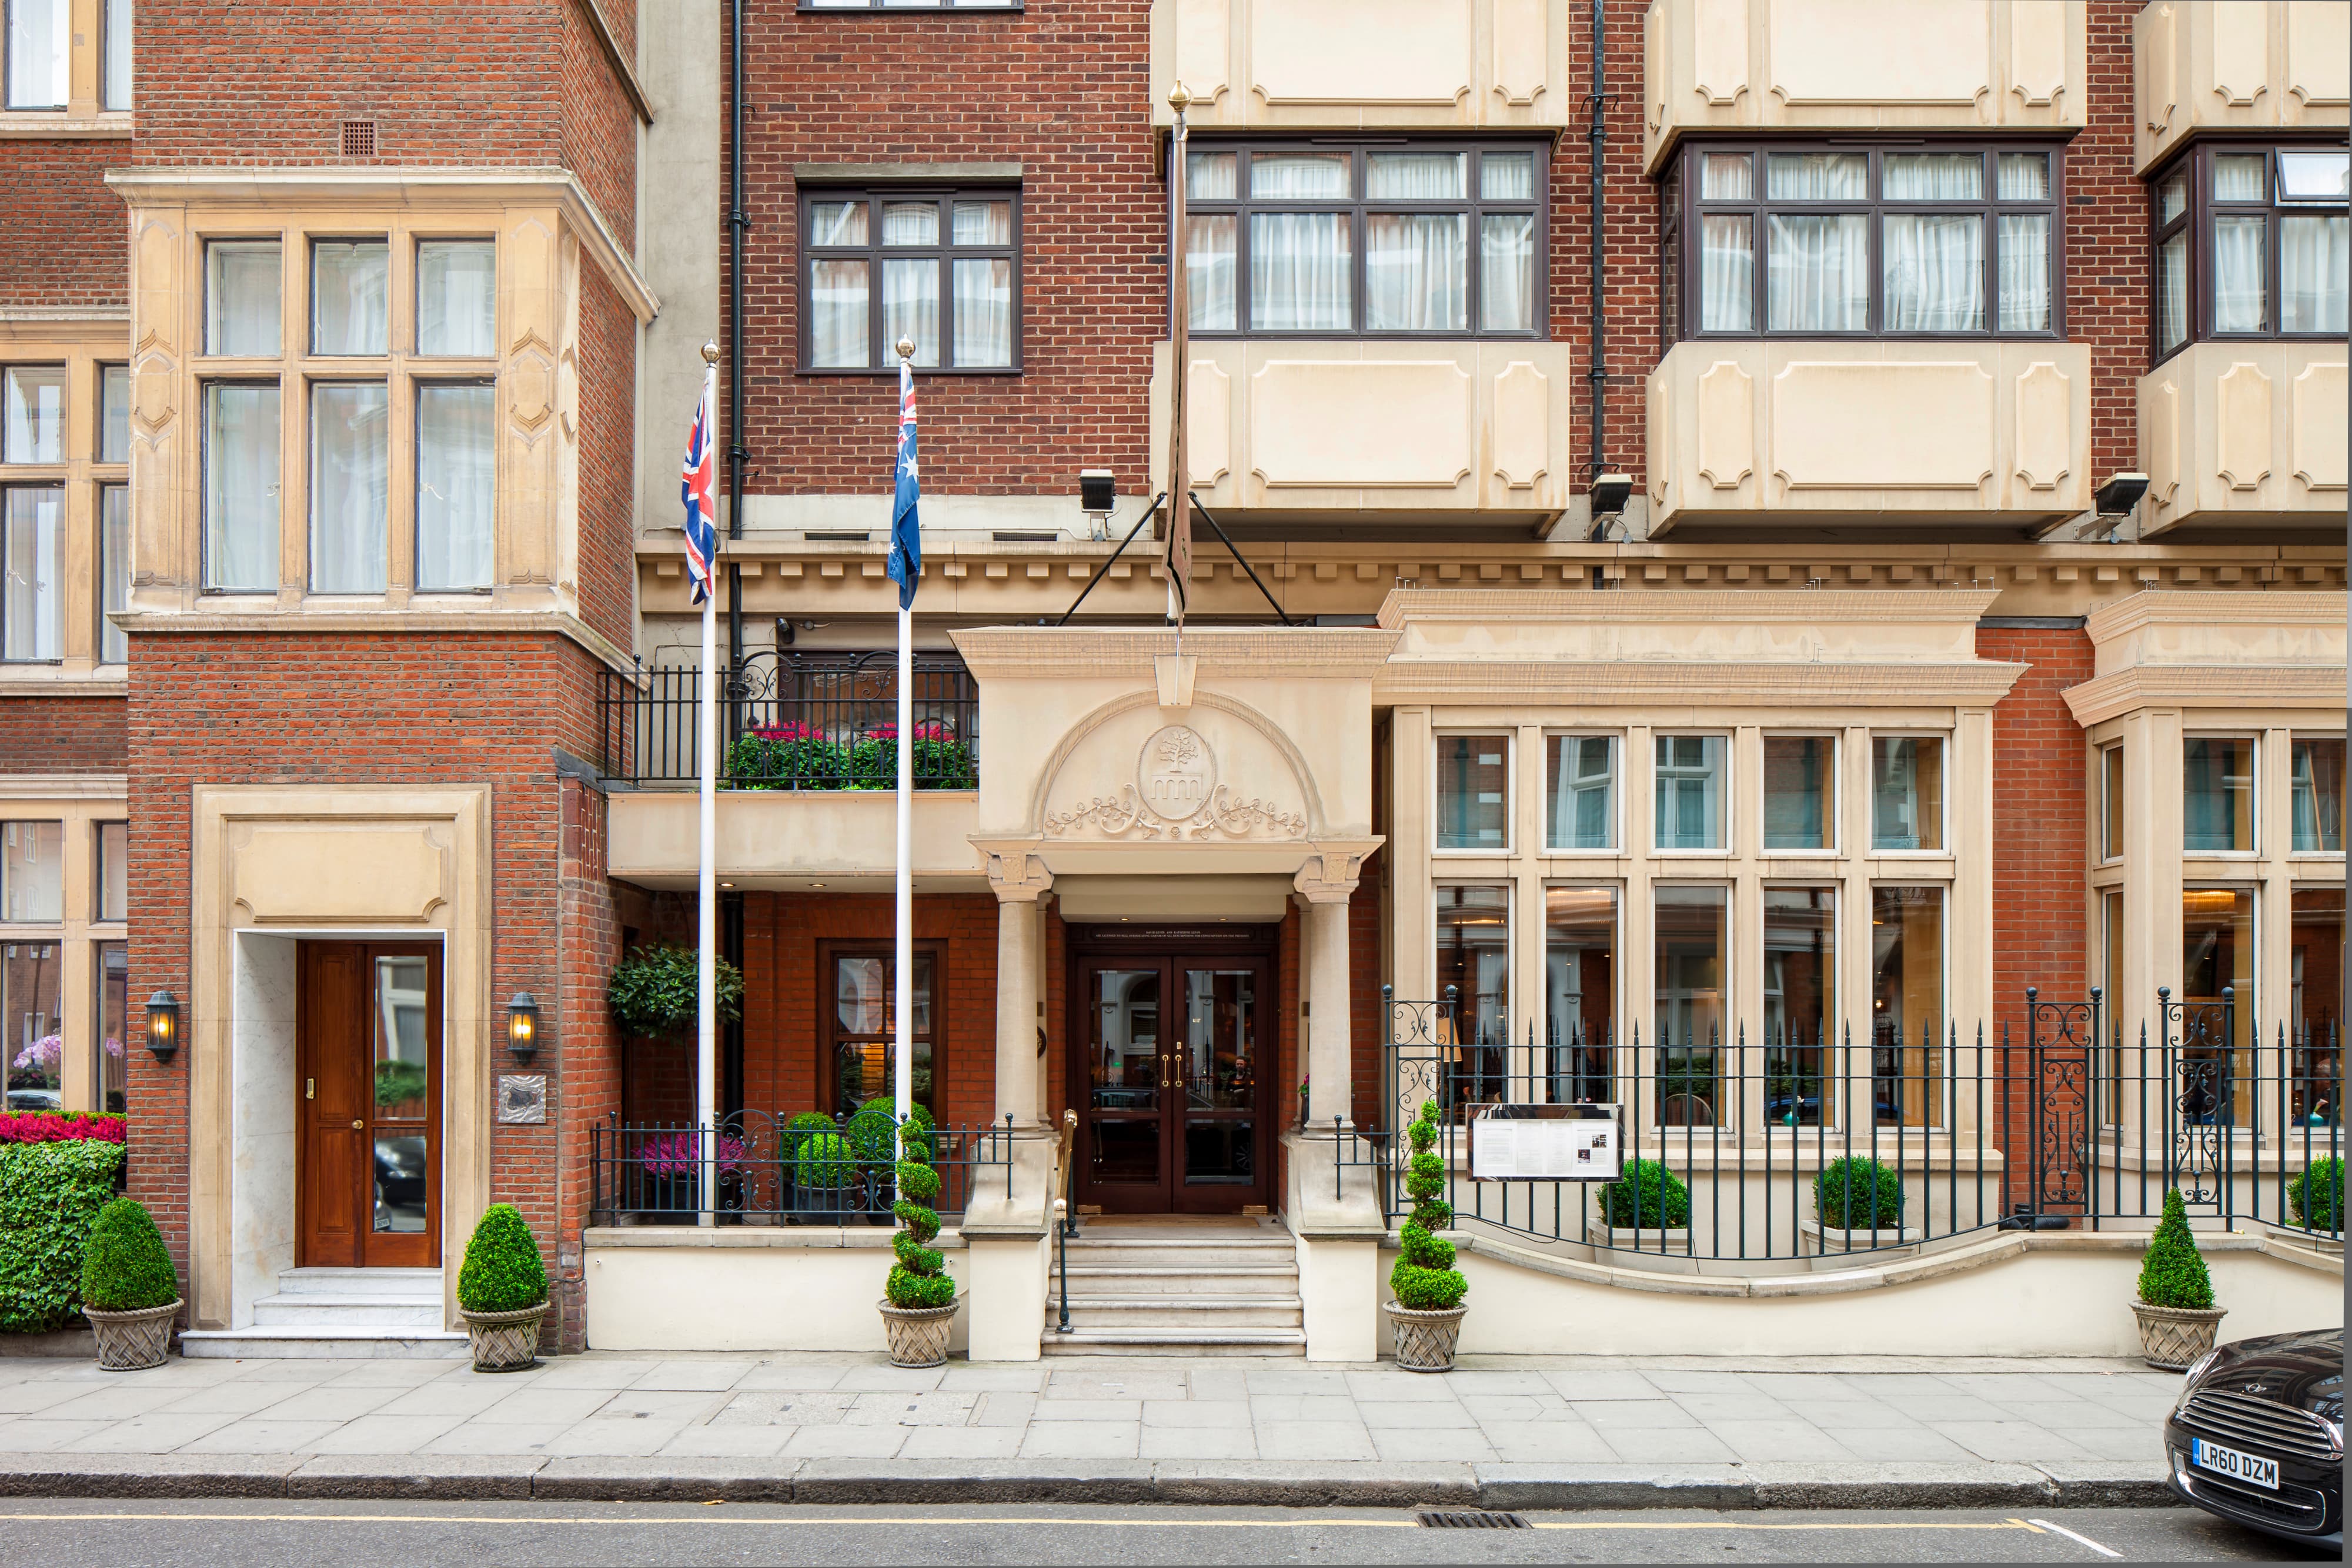 Entrance of The Capital Hotel & Apartments The Capital Hotel, Apartments and Townhouse - London London 020 7589 5171